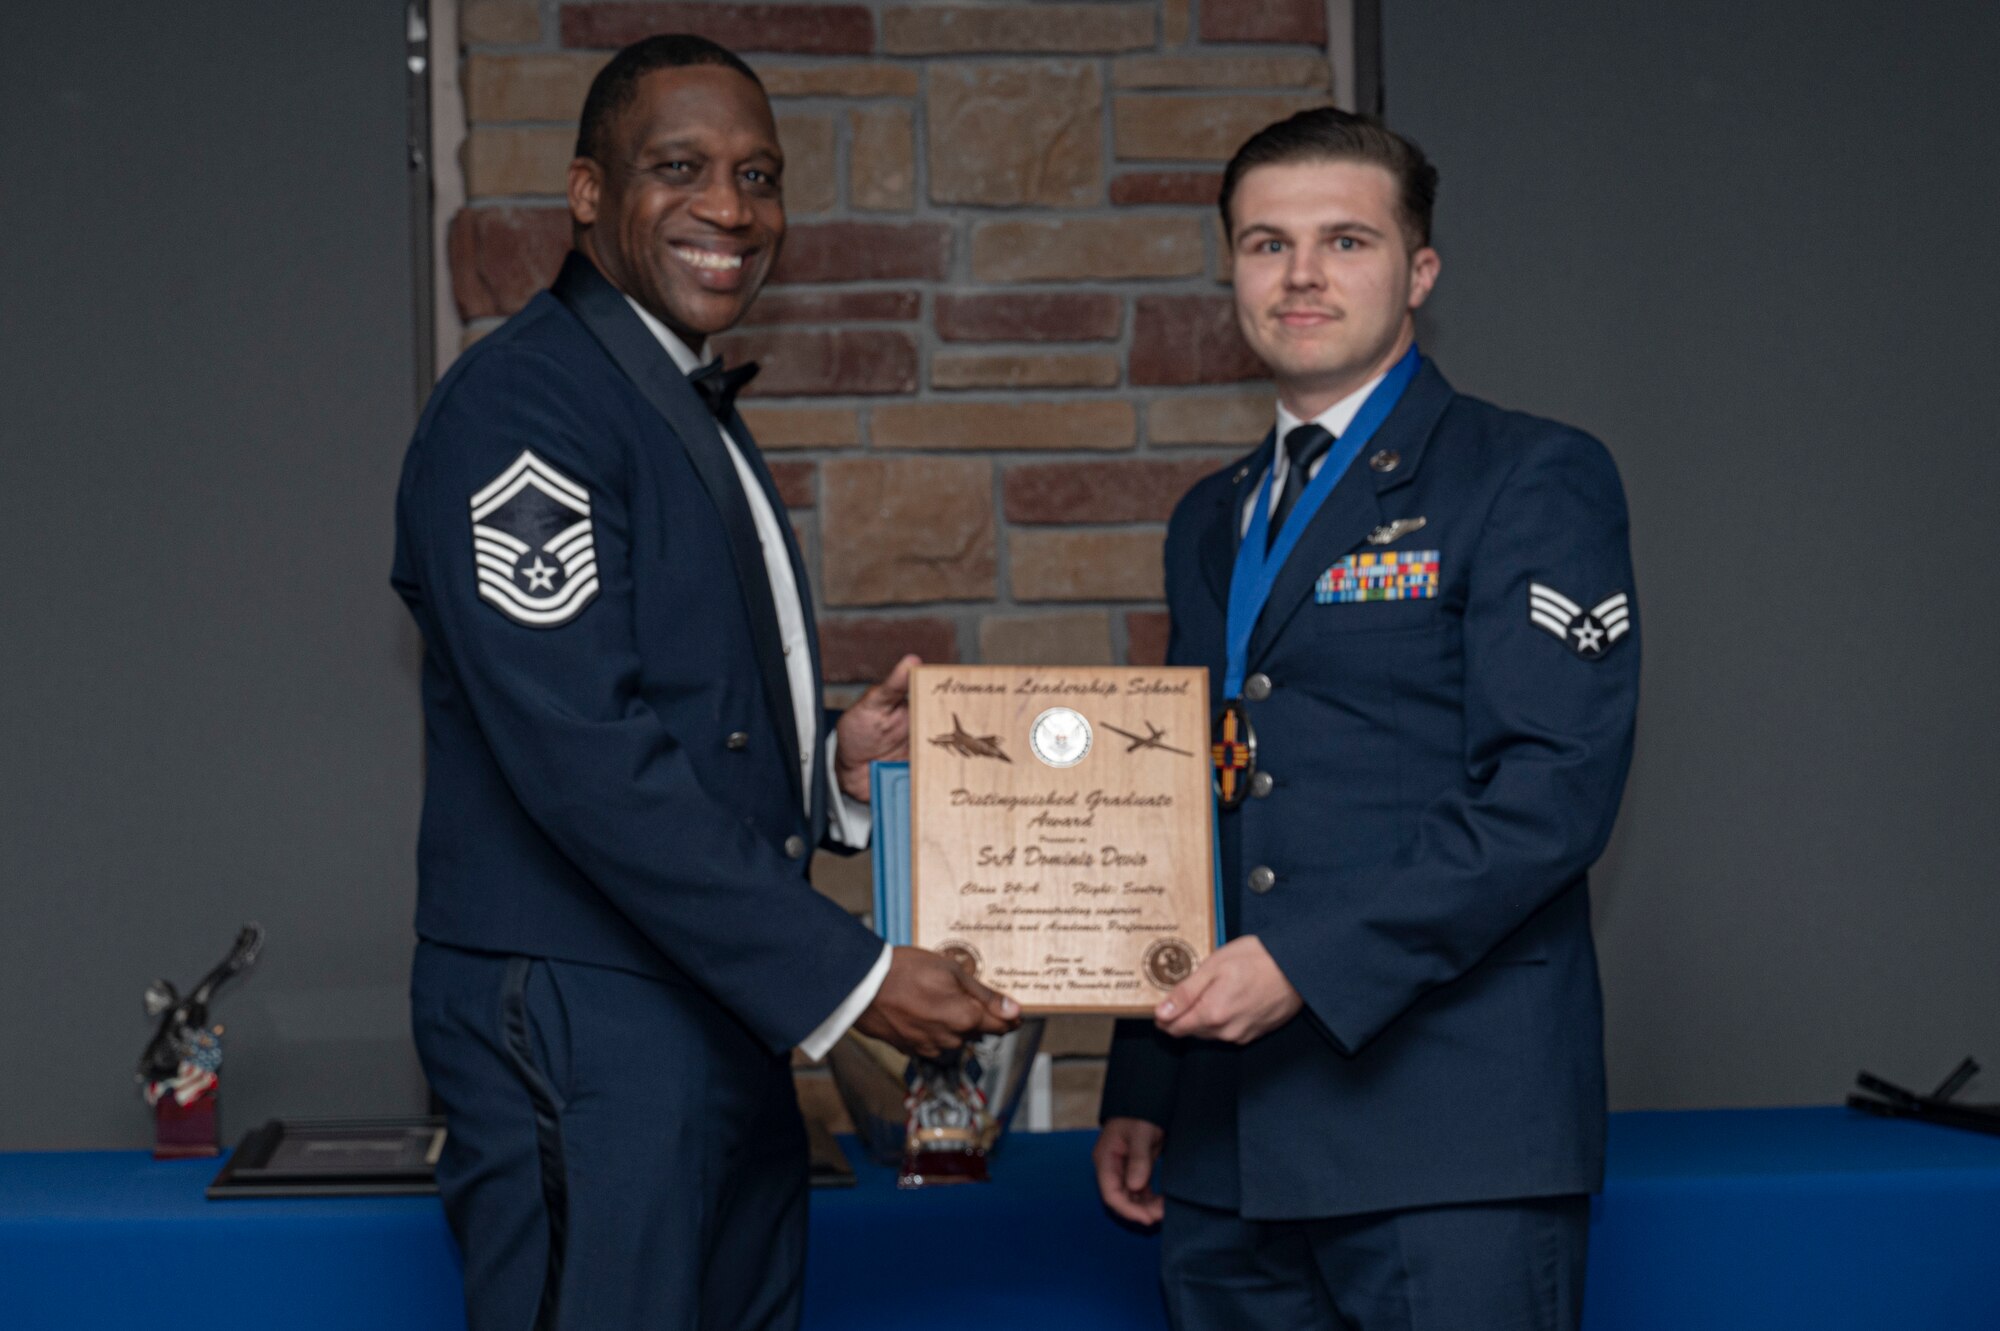 U.S. Air Force Senior Airman Dominic Devio right, Airman Leadership Graduate, accepts the Distinguished Graduate Award from Holloman Top III representative Senior Master Sgt. Rodney Dunn during the graduation of Joel C. Mayo ALS Class 24-A at Holloman Air Force Base, New Mexico, Nov. 2, 2023. The distinguished graduate award is presented to the top 10% of graduates for their performance in academic evaluations and demonstration of leadership. (U.S. Air Force photo by Airman 1st Class Michelle Ferrari)